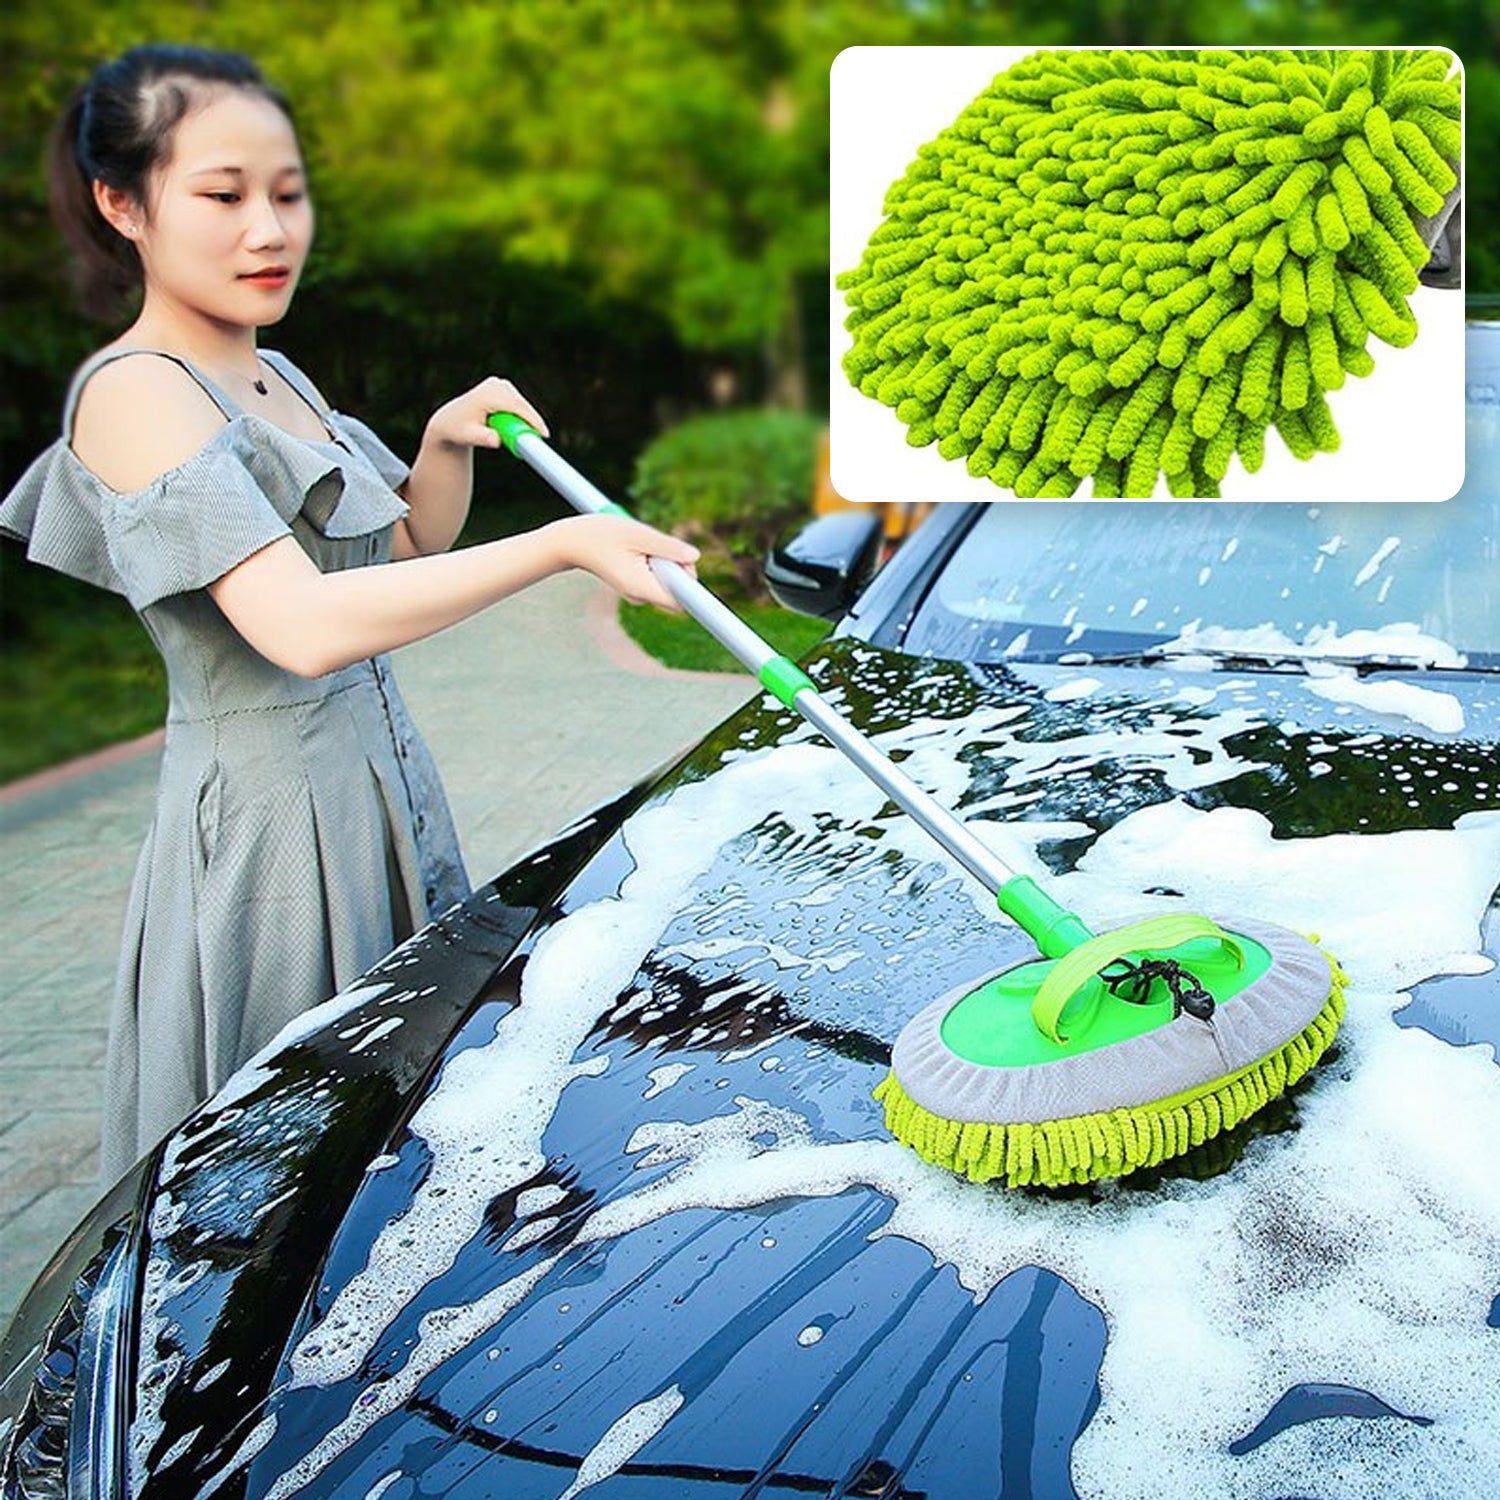 7848 MICROFIBER FLEXIBLE MOP CLEANING ACCESSORIES | MICROFIBER MOP | BRUSH | DRY/WET HOME, KITCHEN, OFFICE CLEANING BRUSH EXTENDABLE HANDLE DeoDap